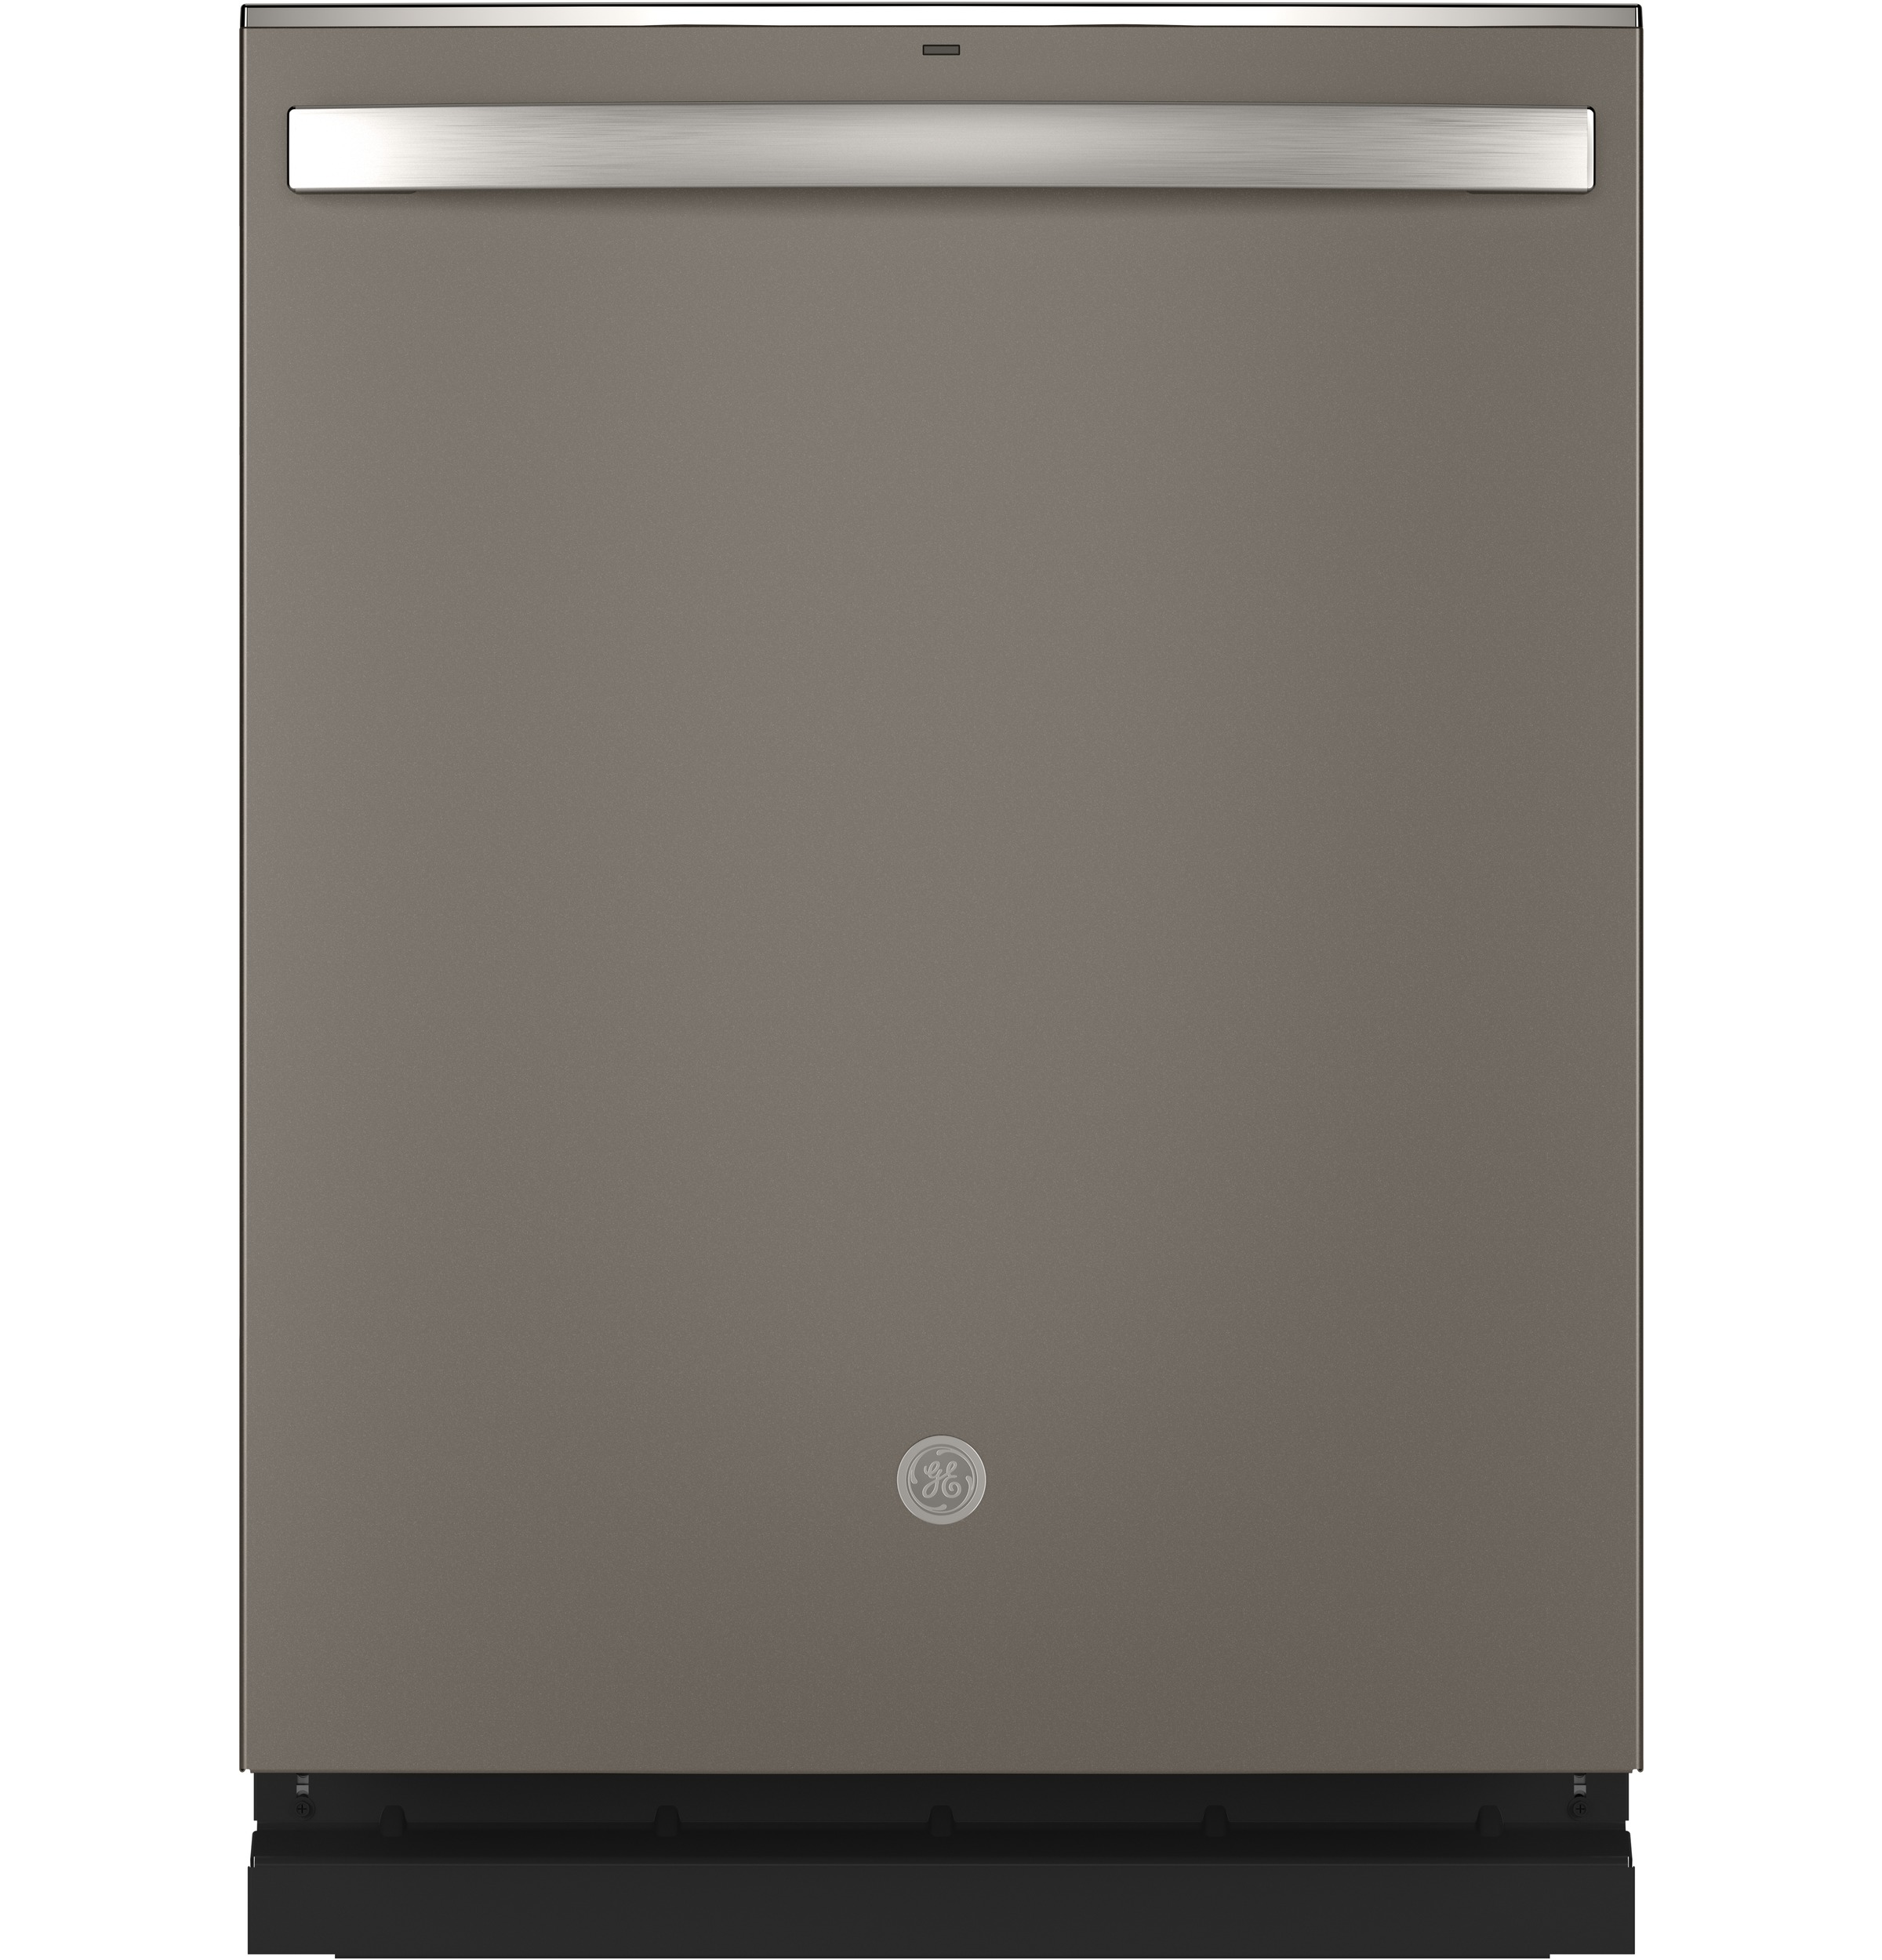 GE® ENERGY STAR® Top Control with Stainless Steel Interior Dishwasher with Sanitize Cycle & Dry Boost with Fan Assist